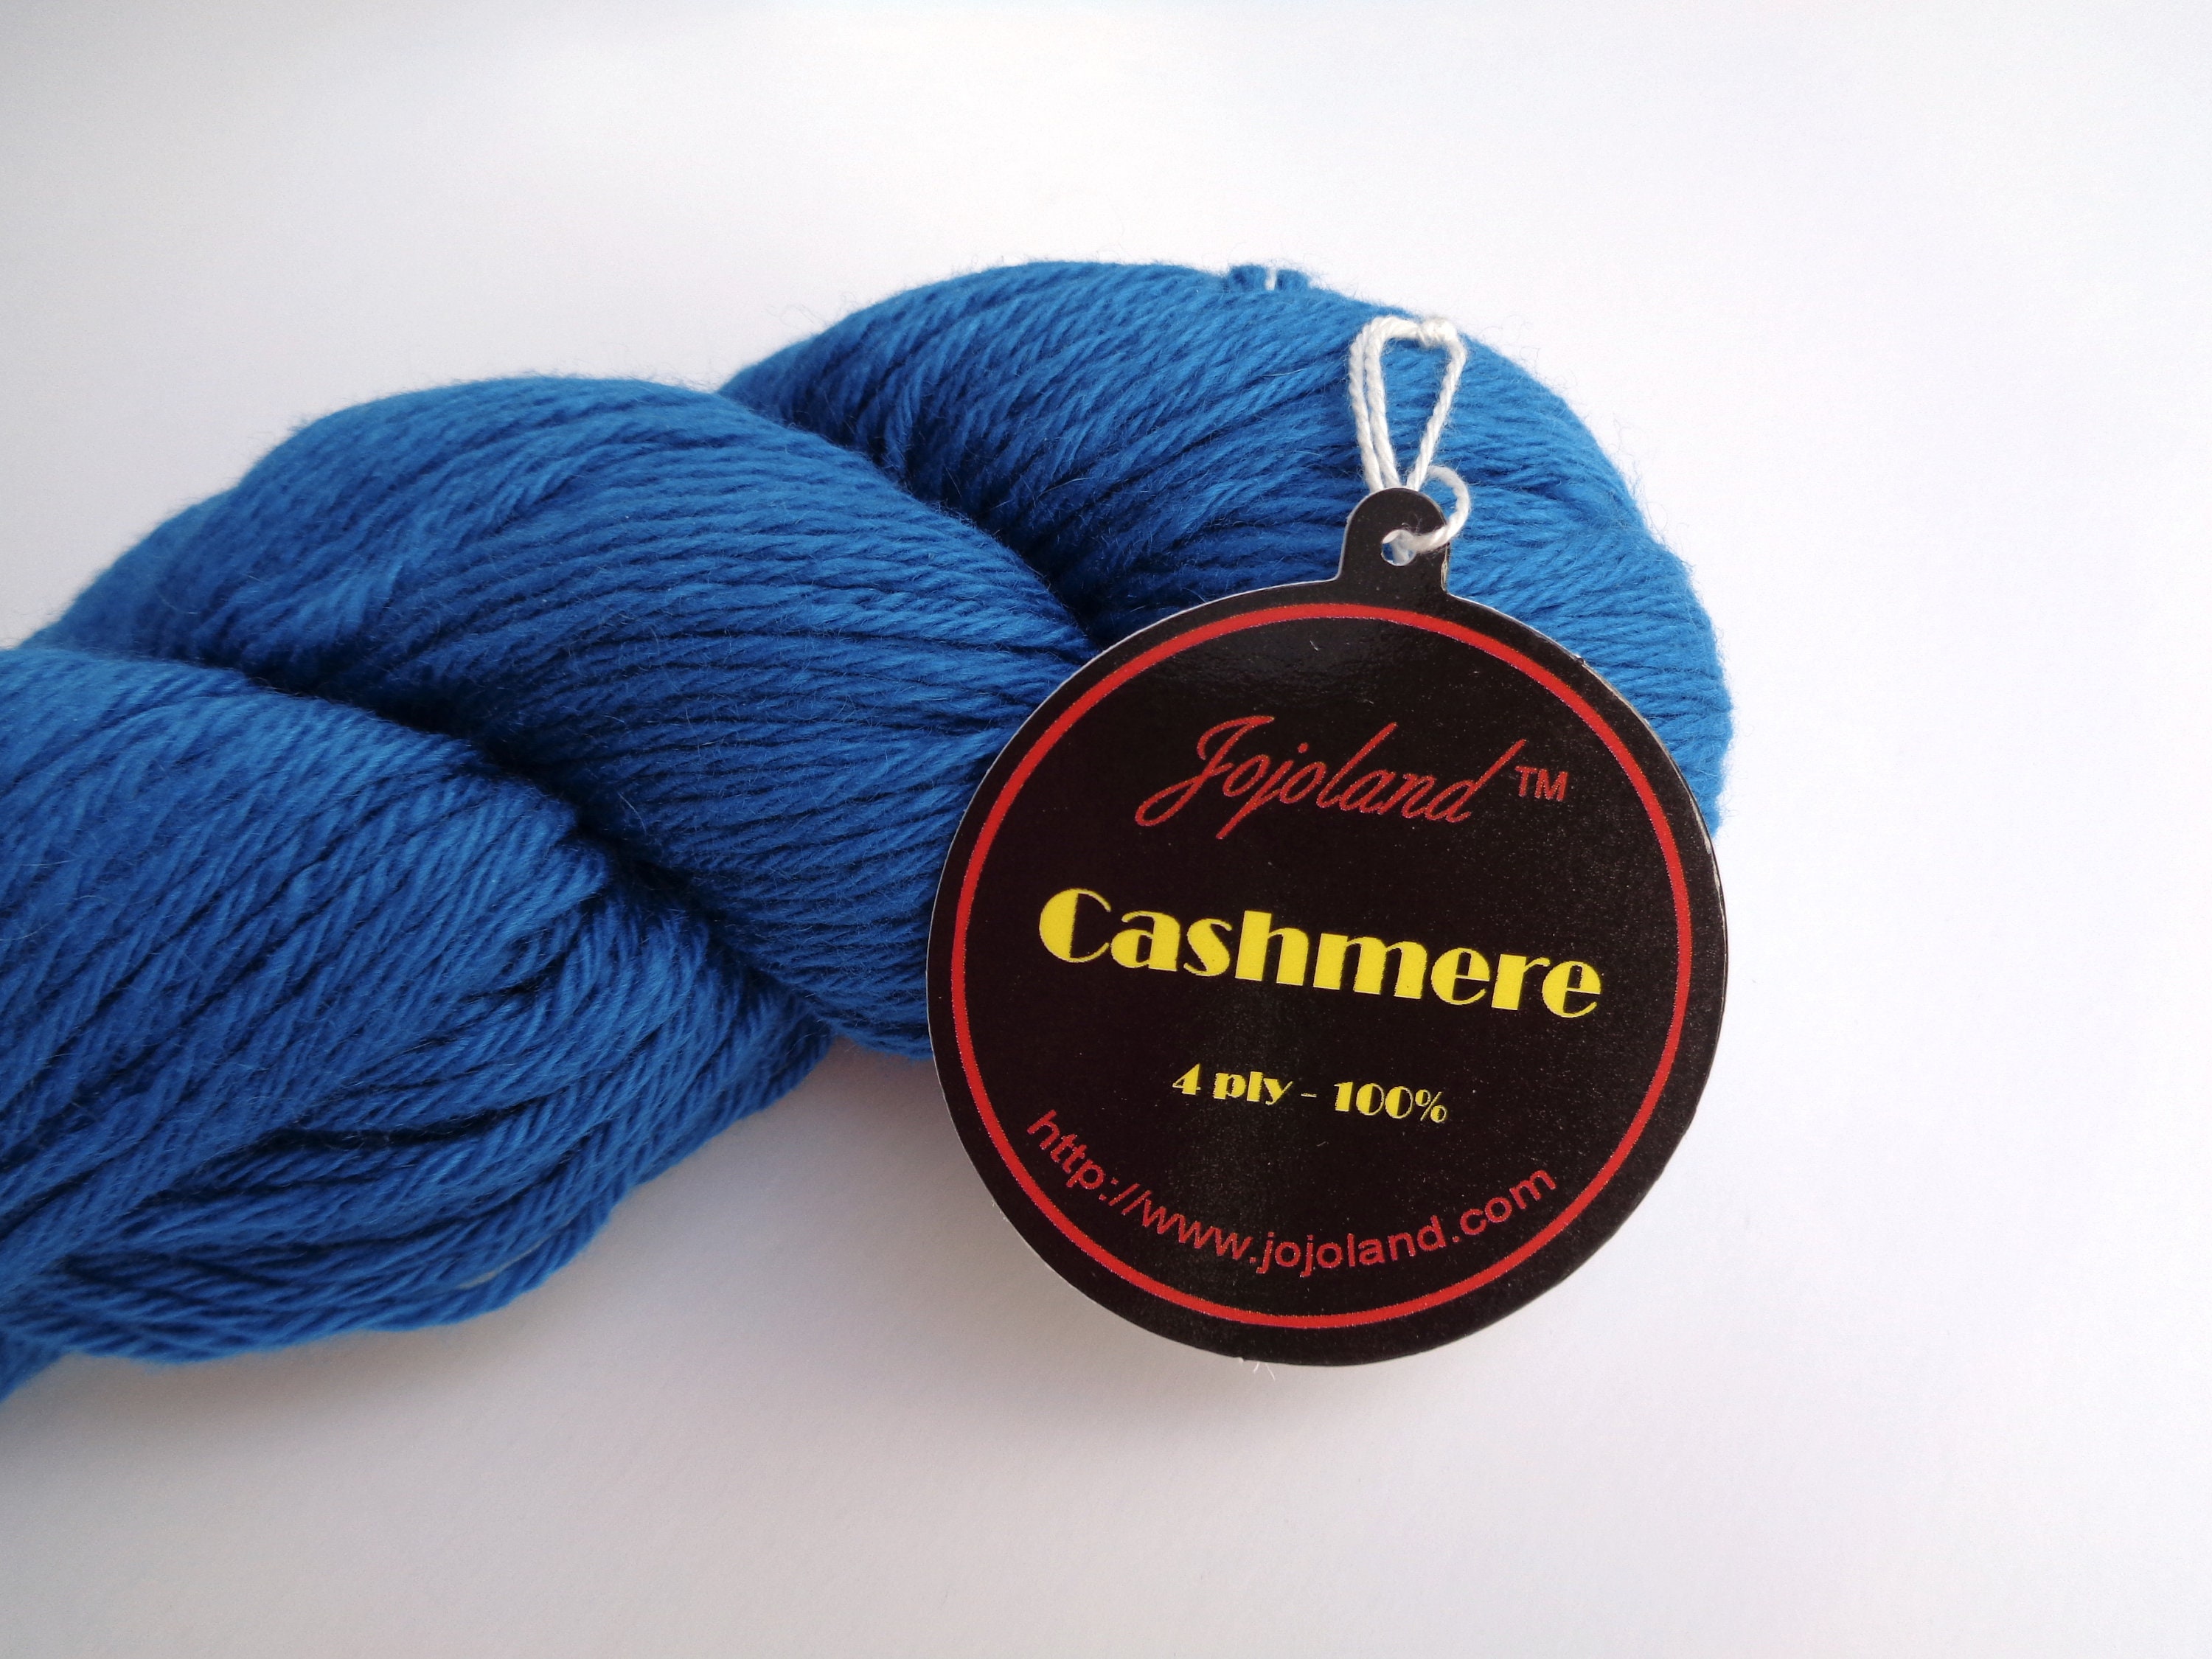 Pure cashmere darning yarn, 100% cashmere repair yarn, cashmere remnants,  assorted cashmere darning yarn